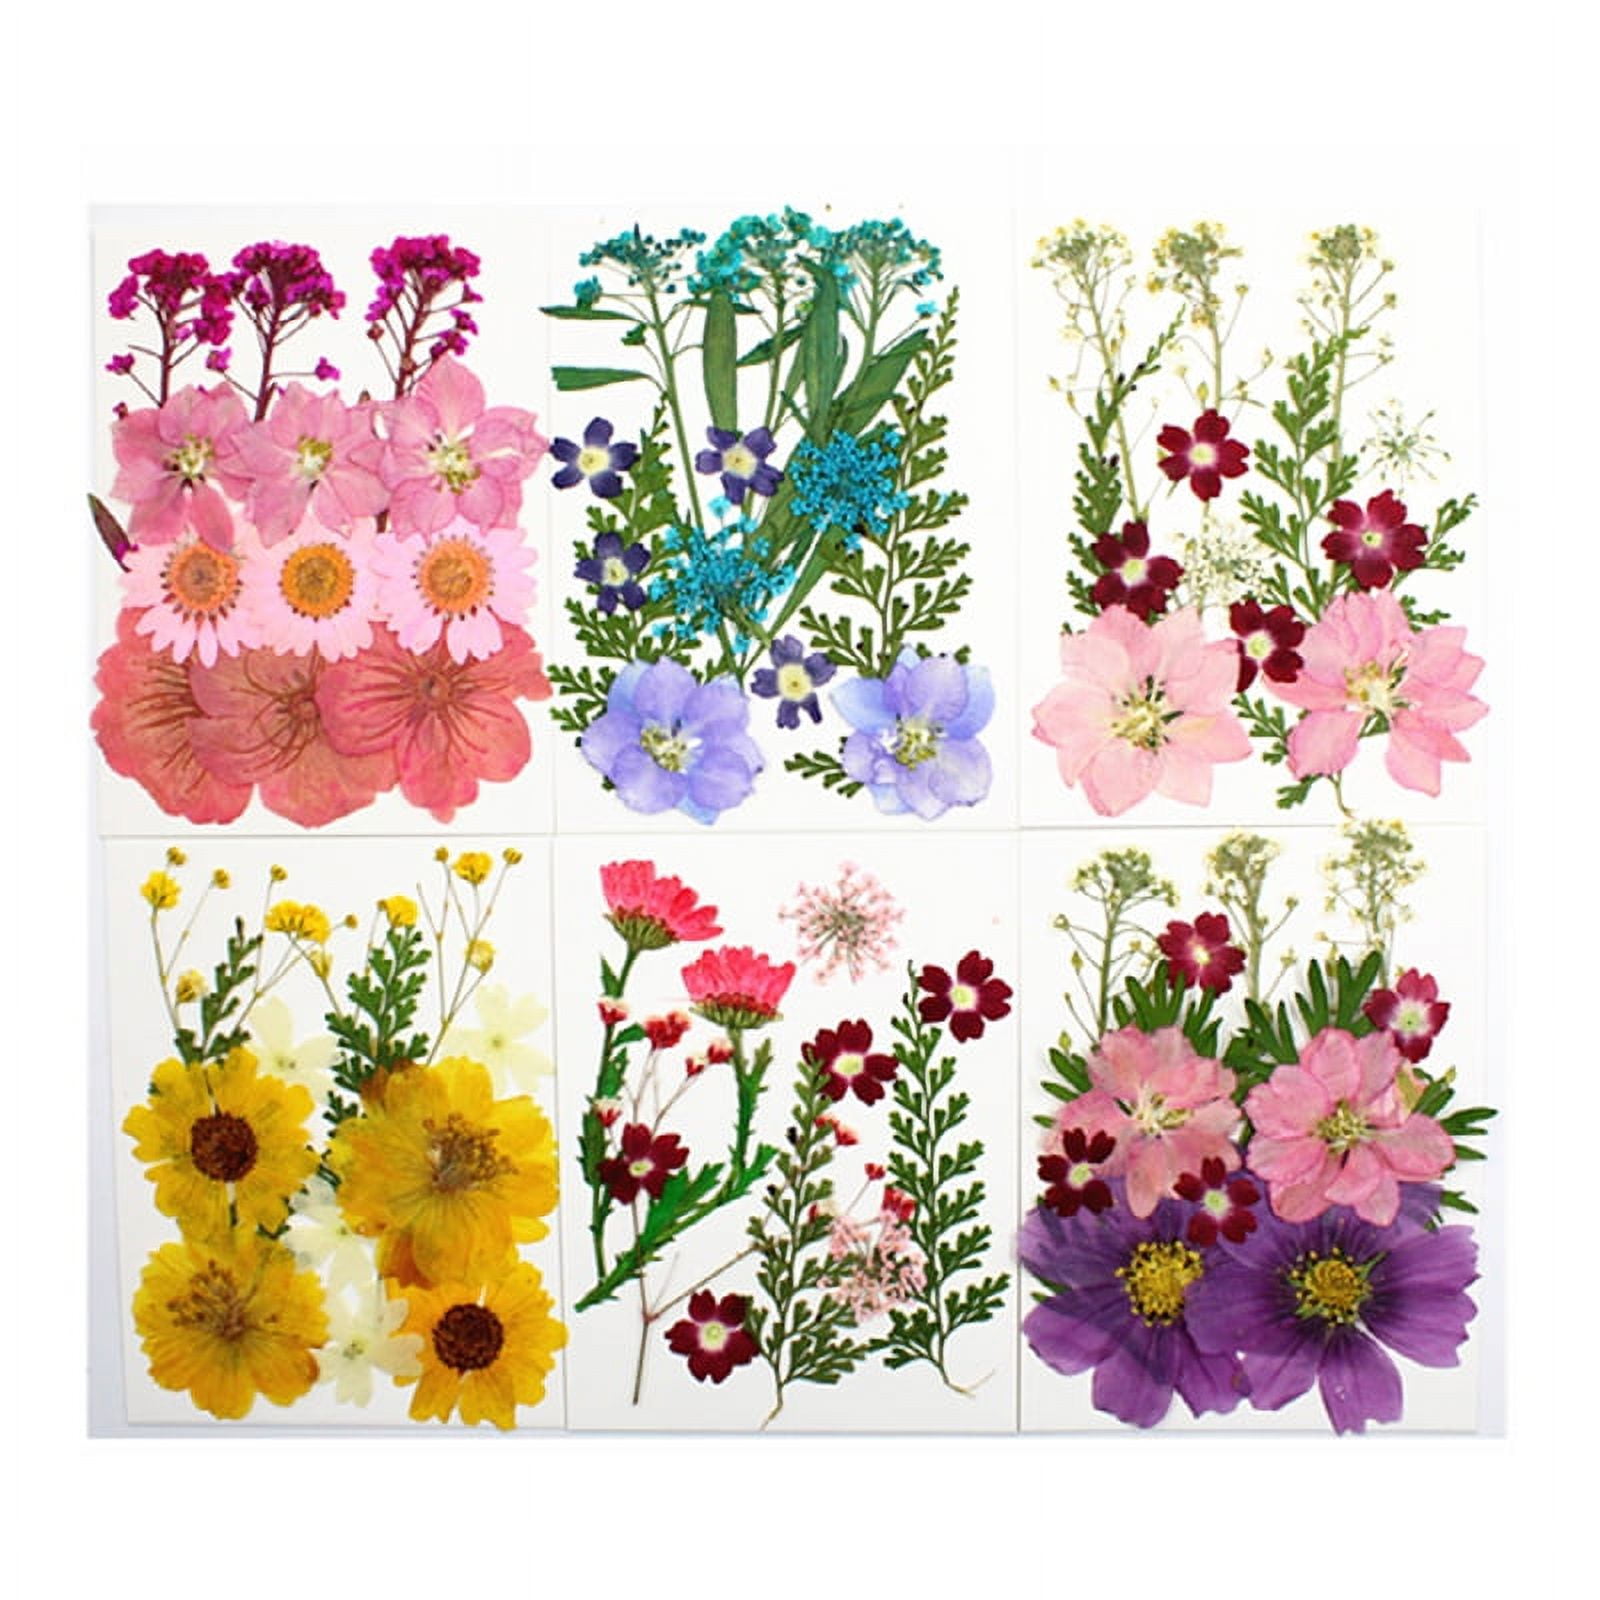  100 Pieces Dried Pressed Flowers for Resin Real Nature